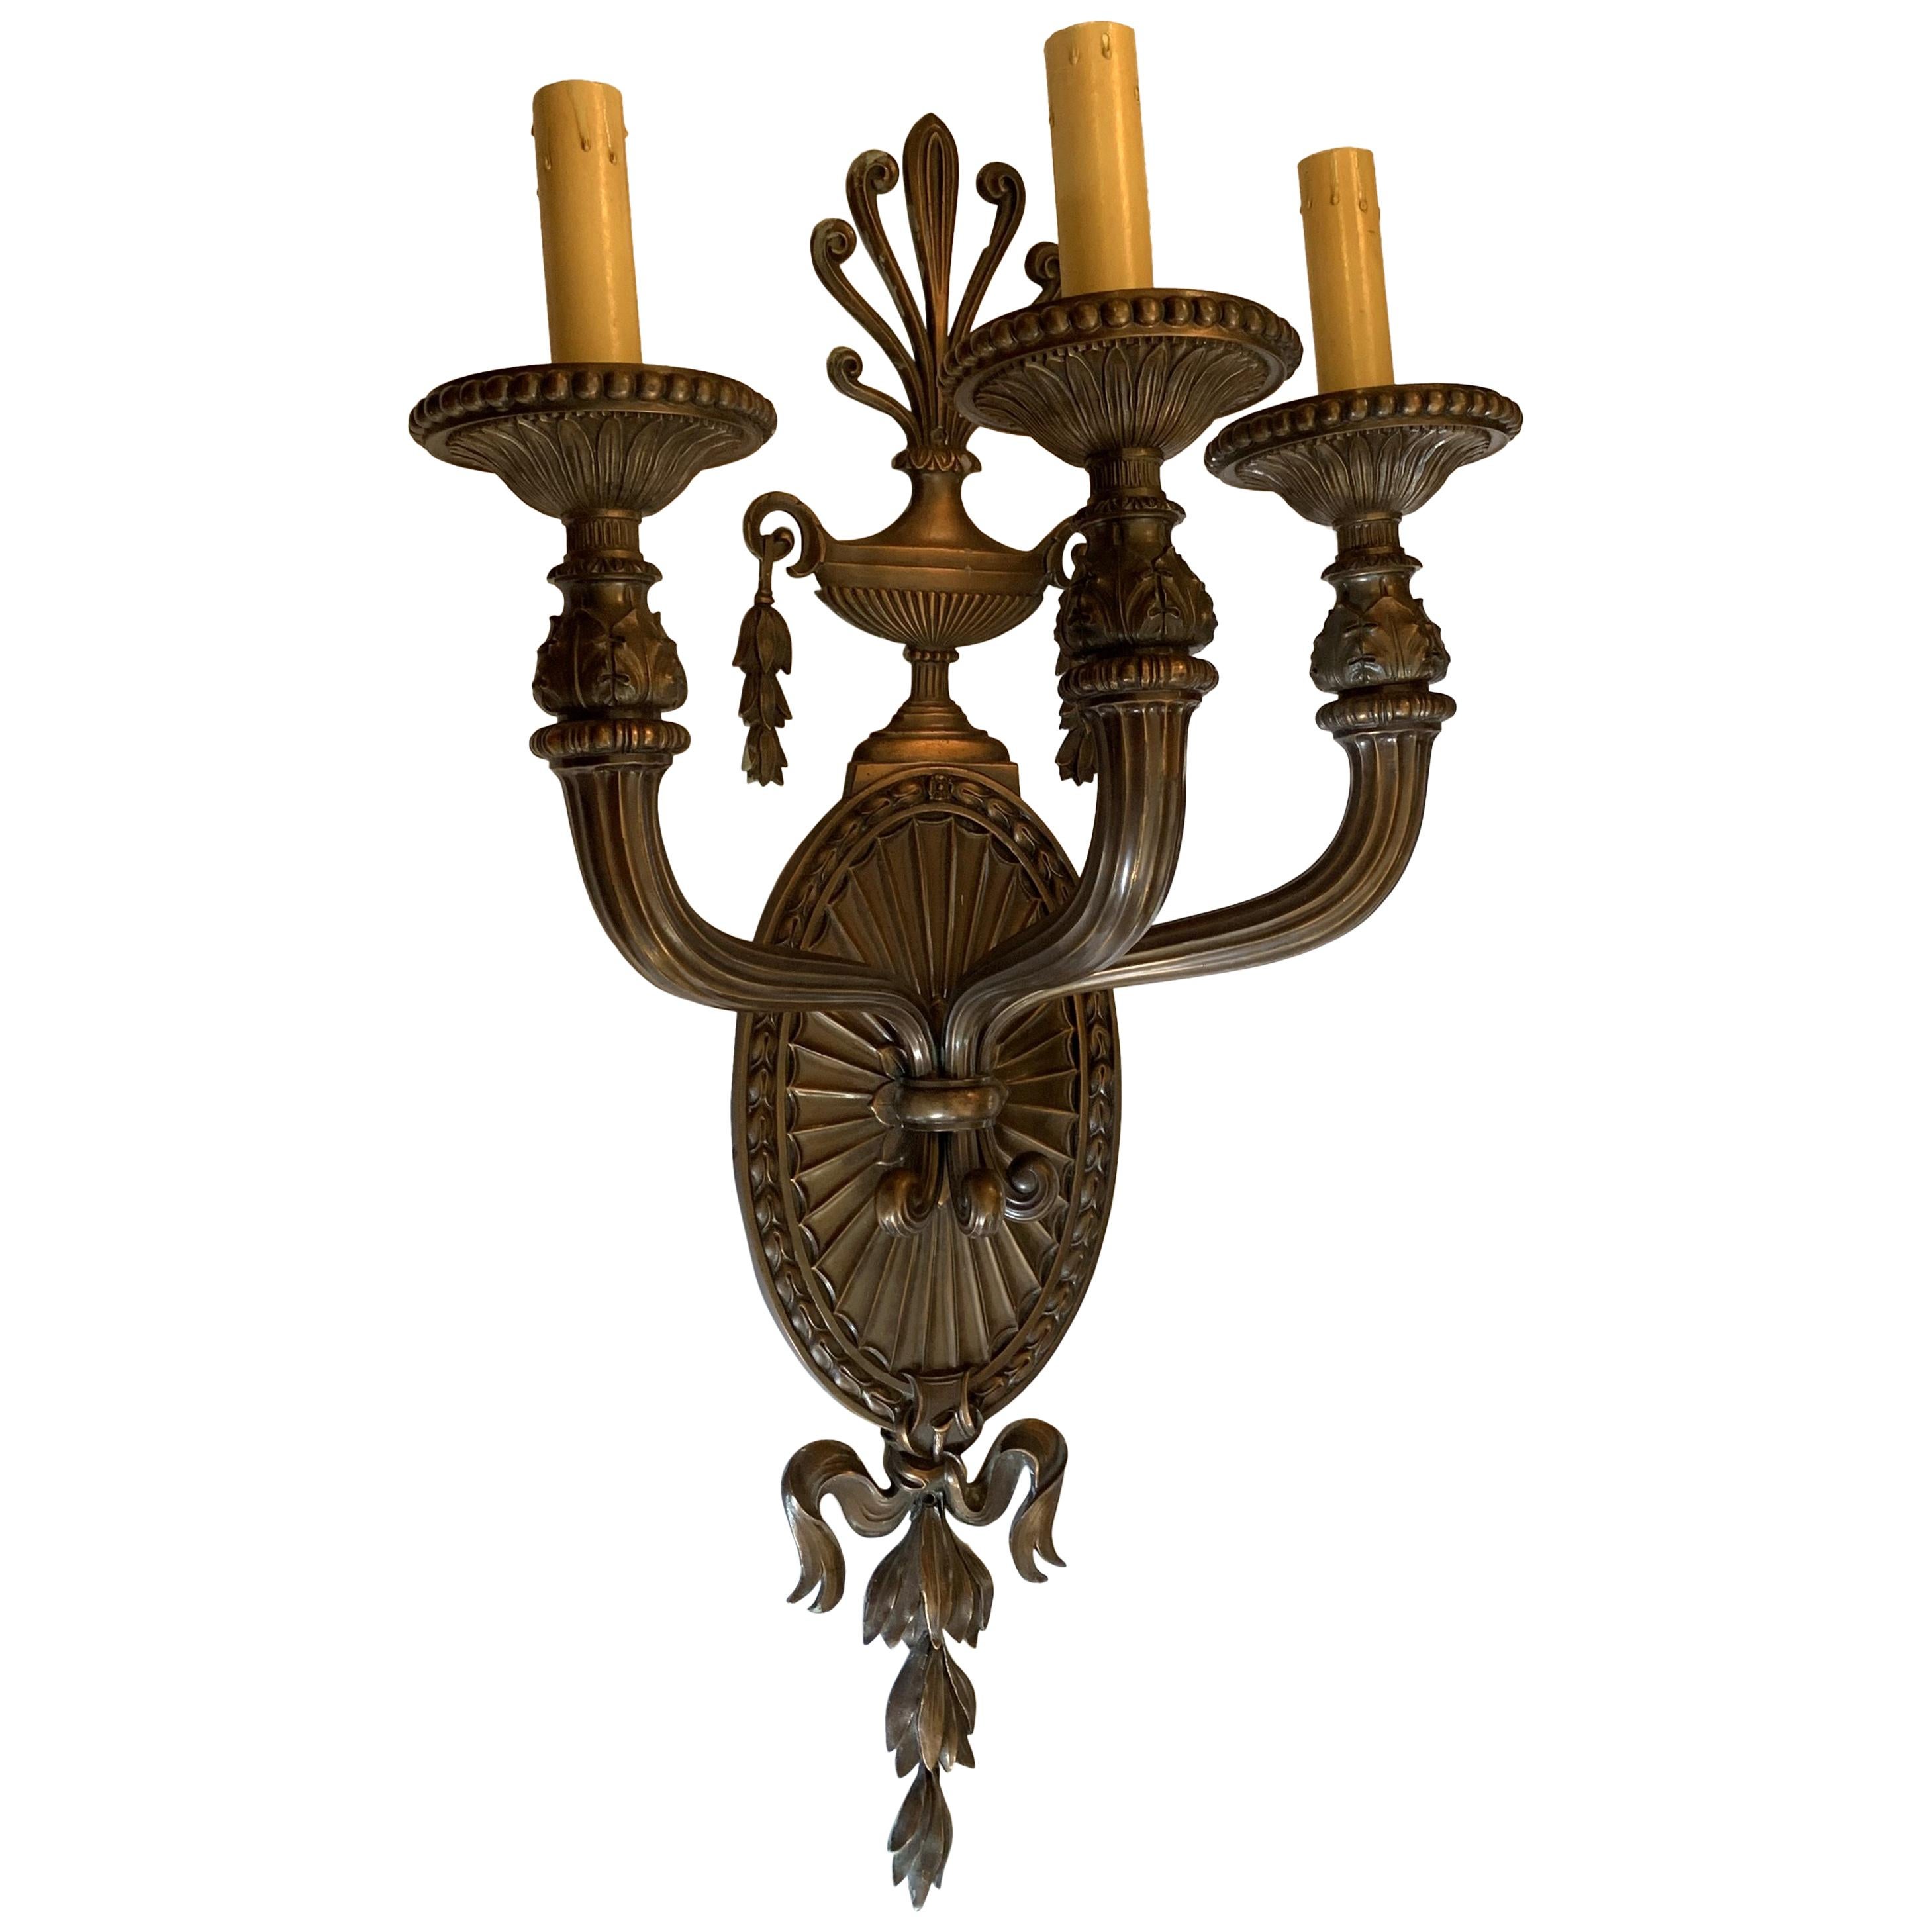 Wonderful Neoclassical Patinated Bronze Large Urn 3-Light Caldwell Sconces, Pair For Sale